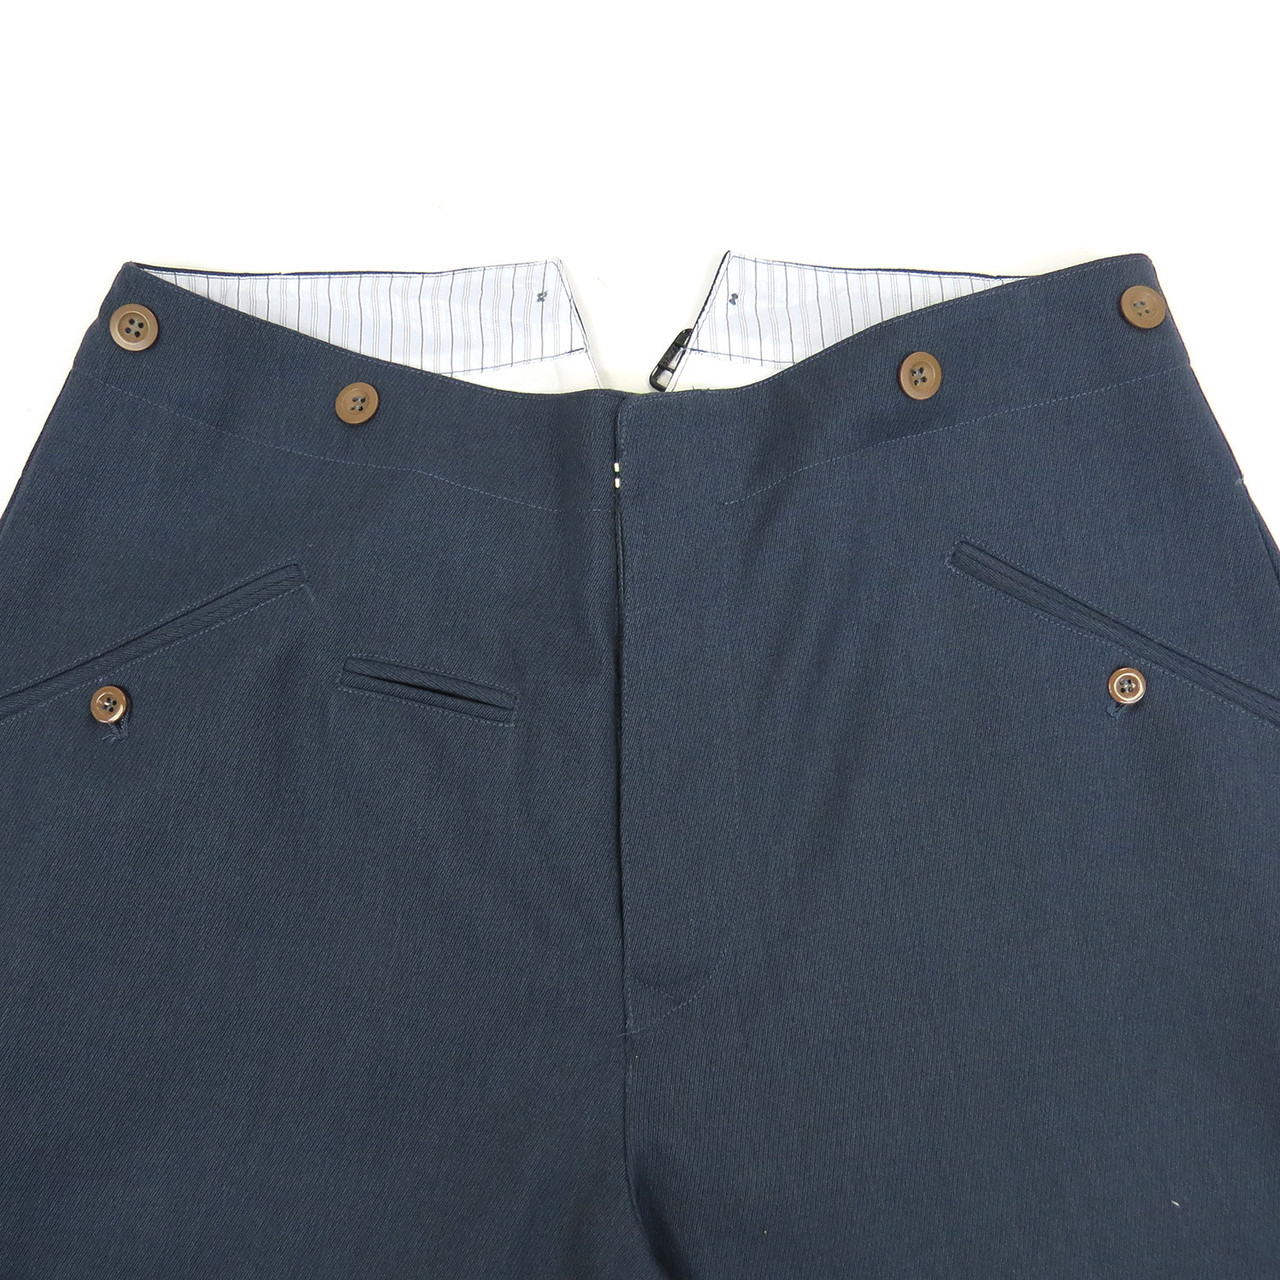 Luftwaffe Officer's Trousers